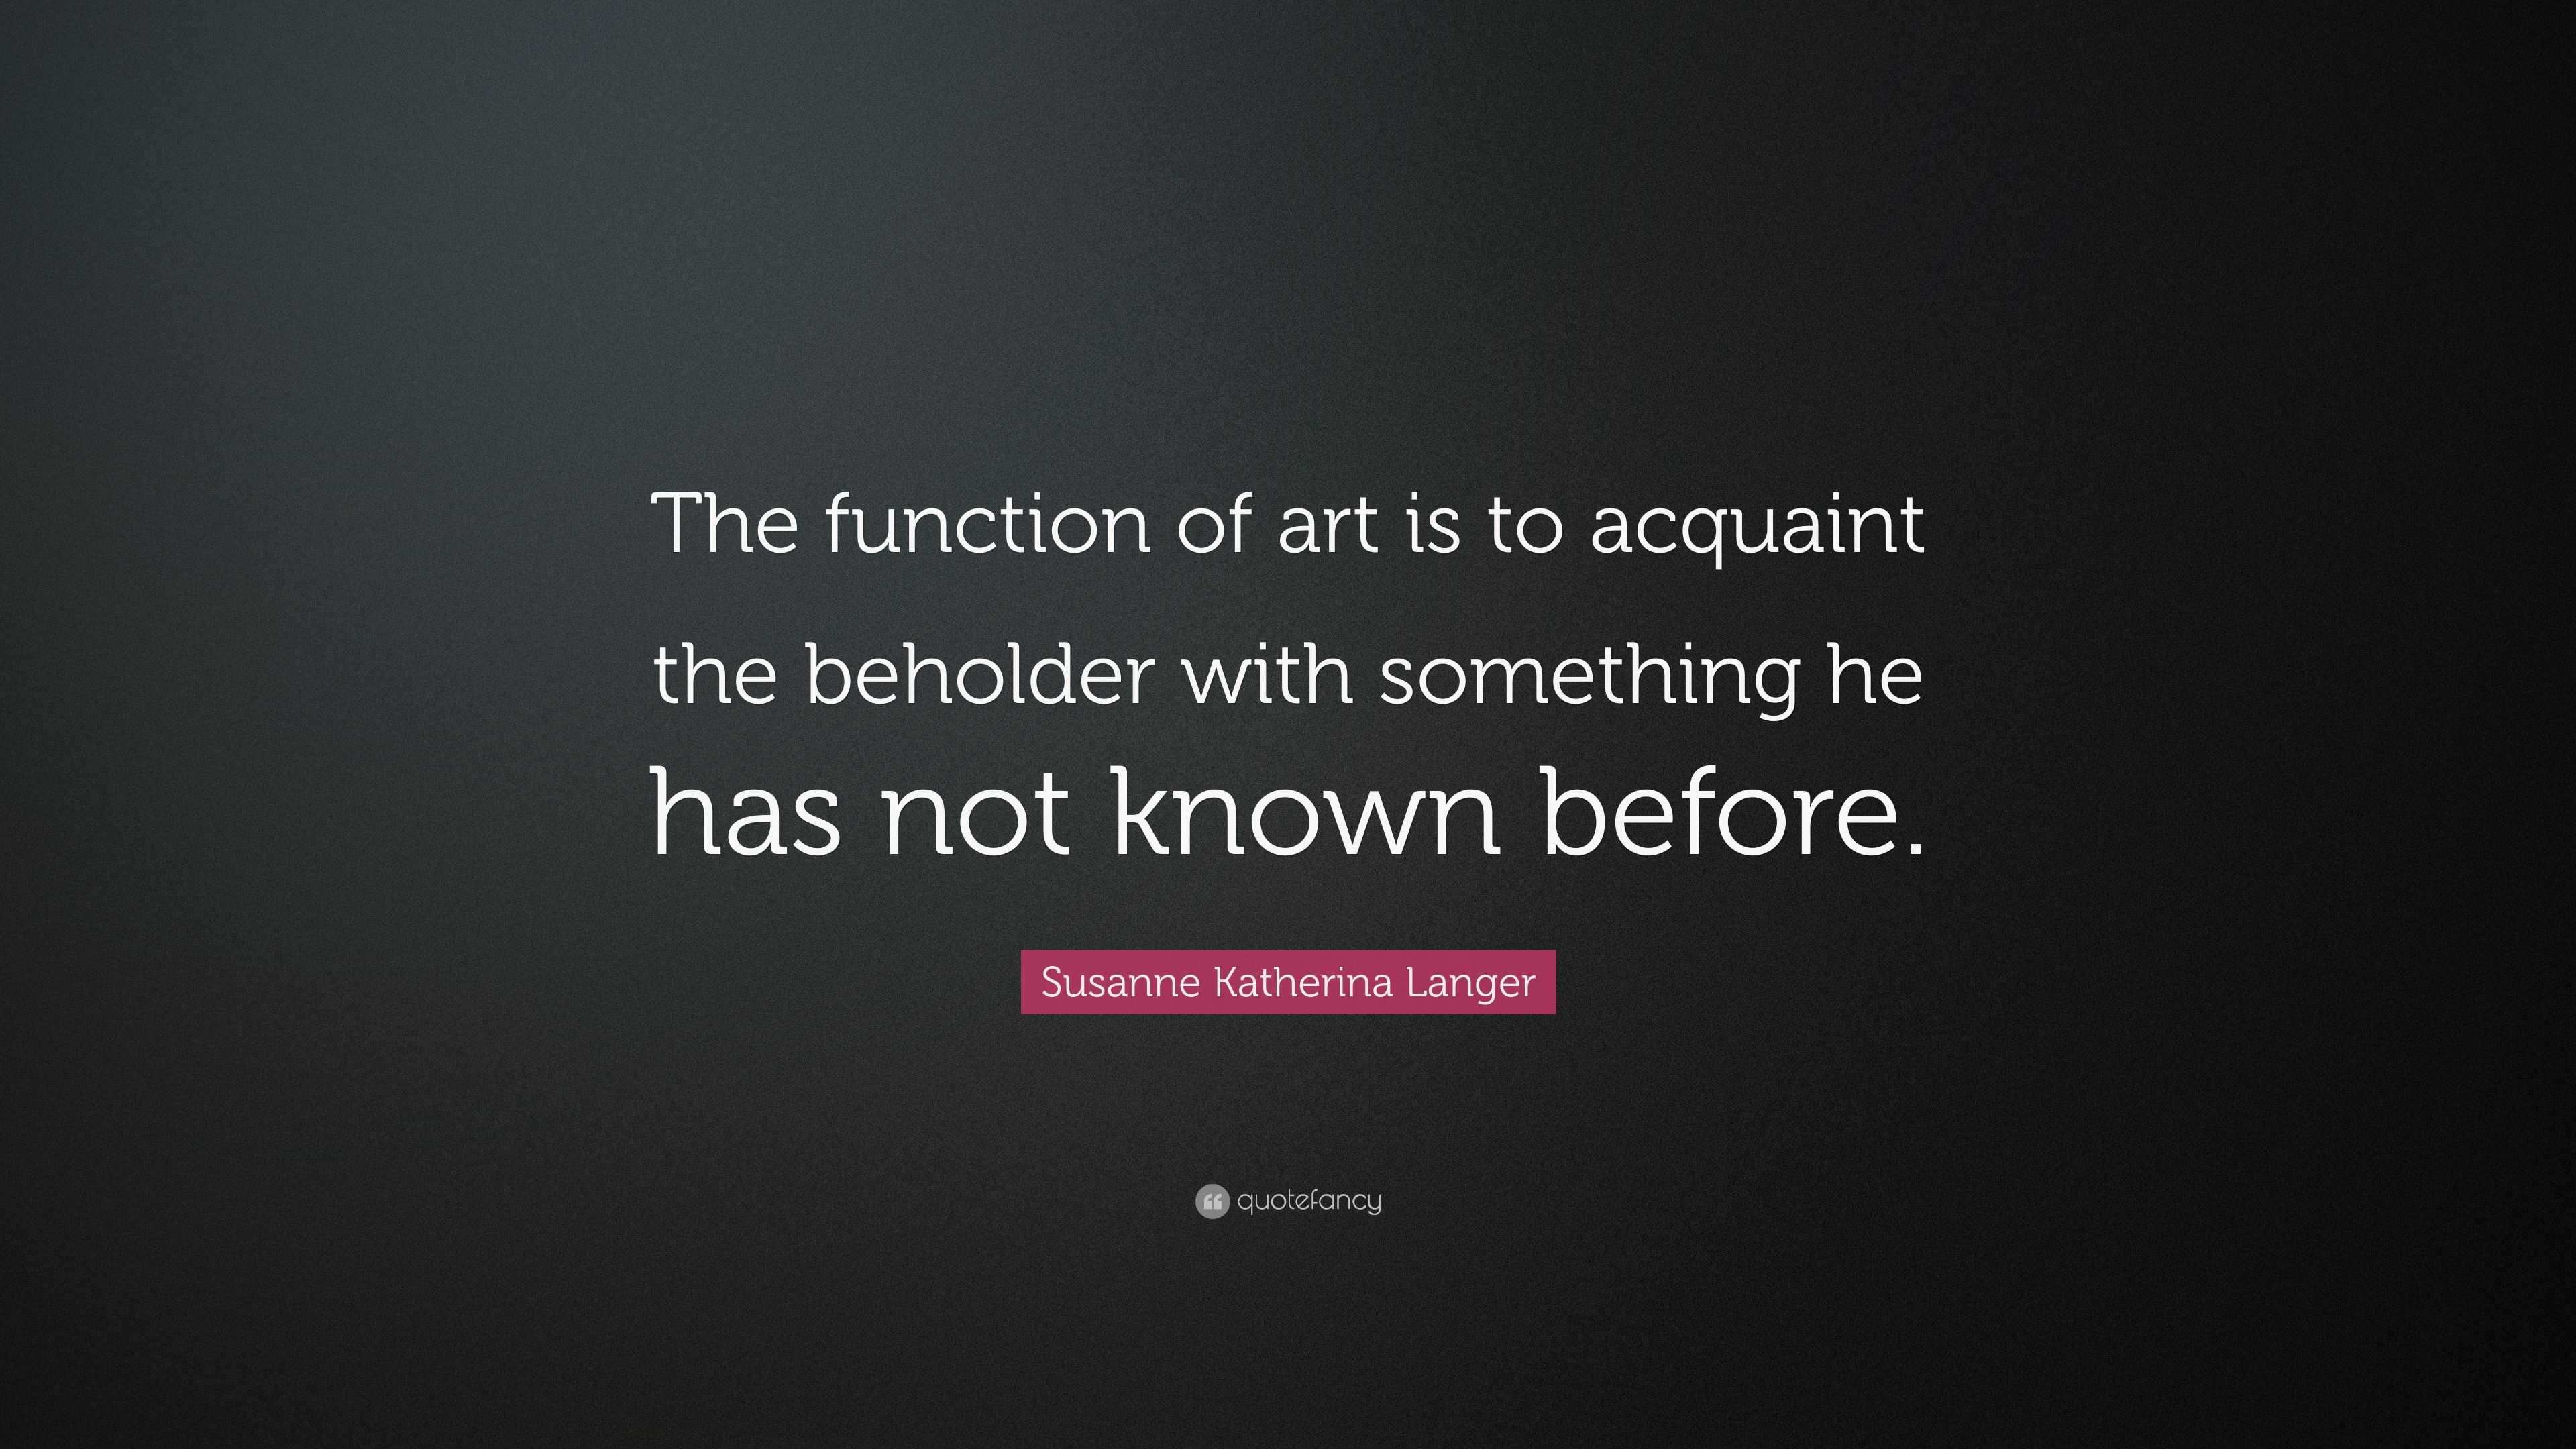 Susanne Katherina Langer Quote: “The function of art is to acquaint the ...